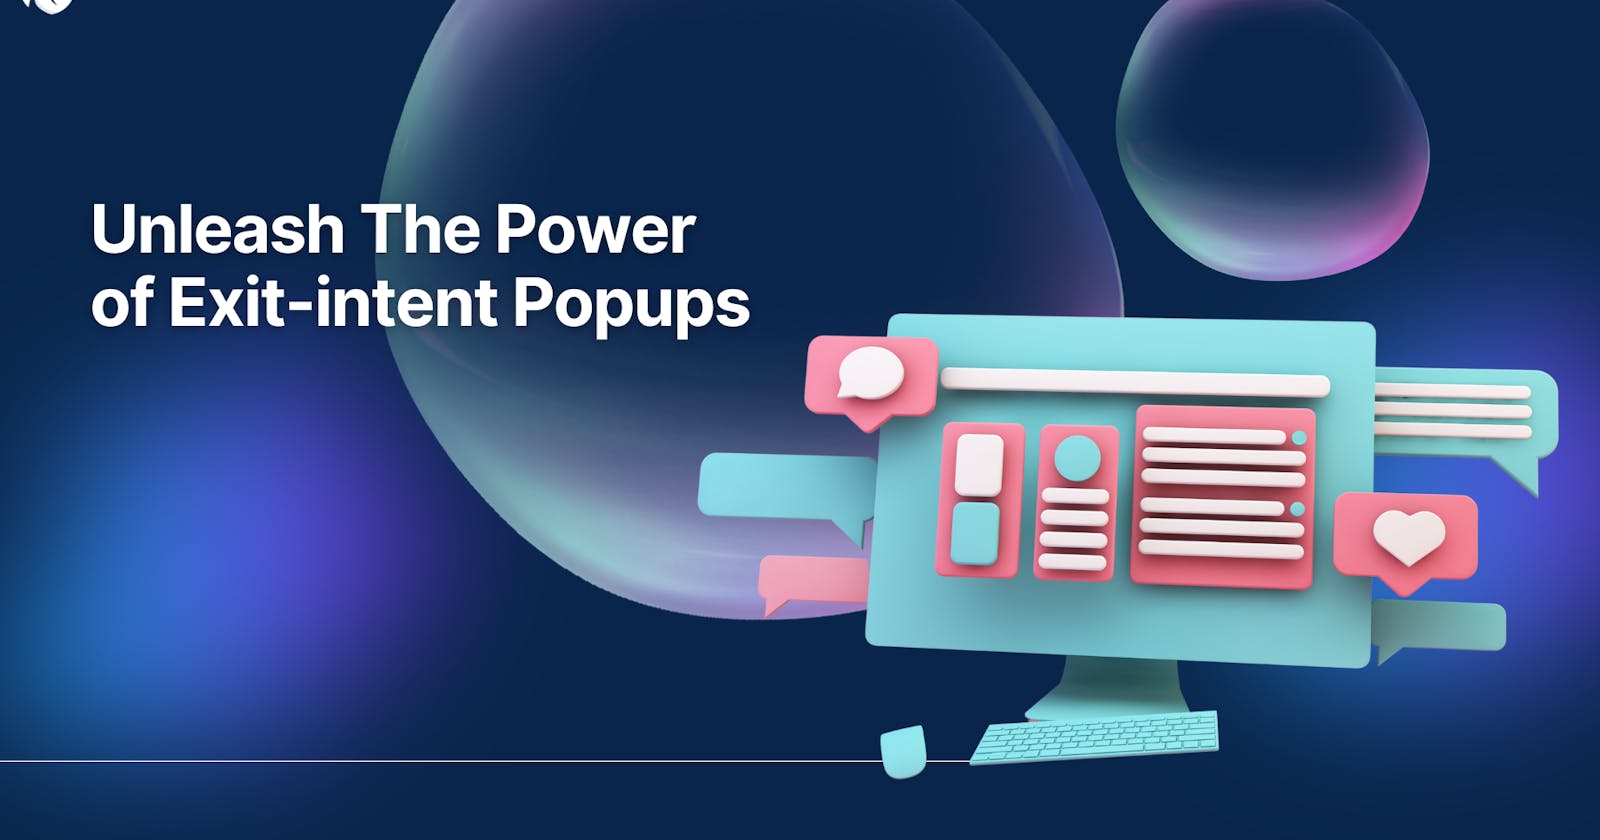 Unleash The Power of Exit-intent Popups